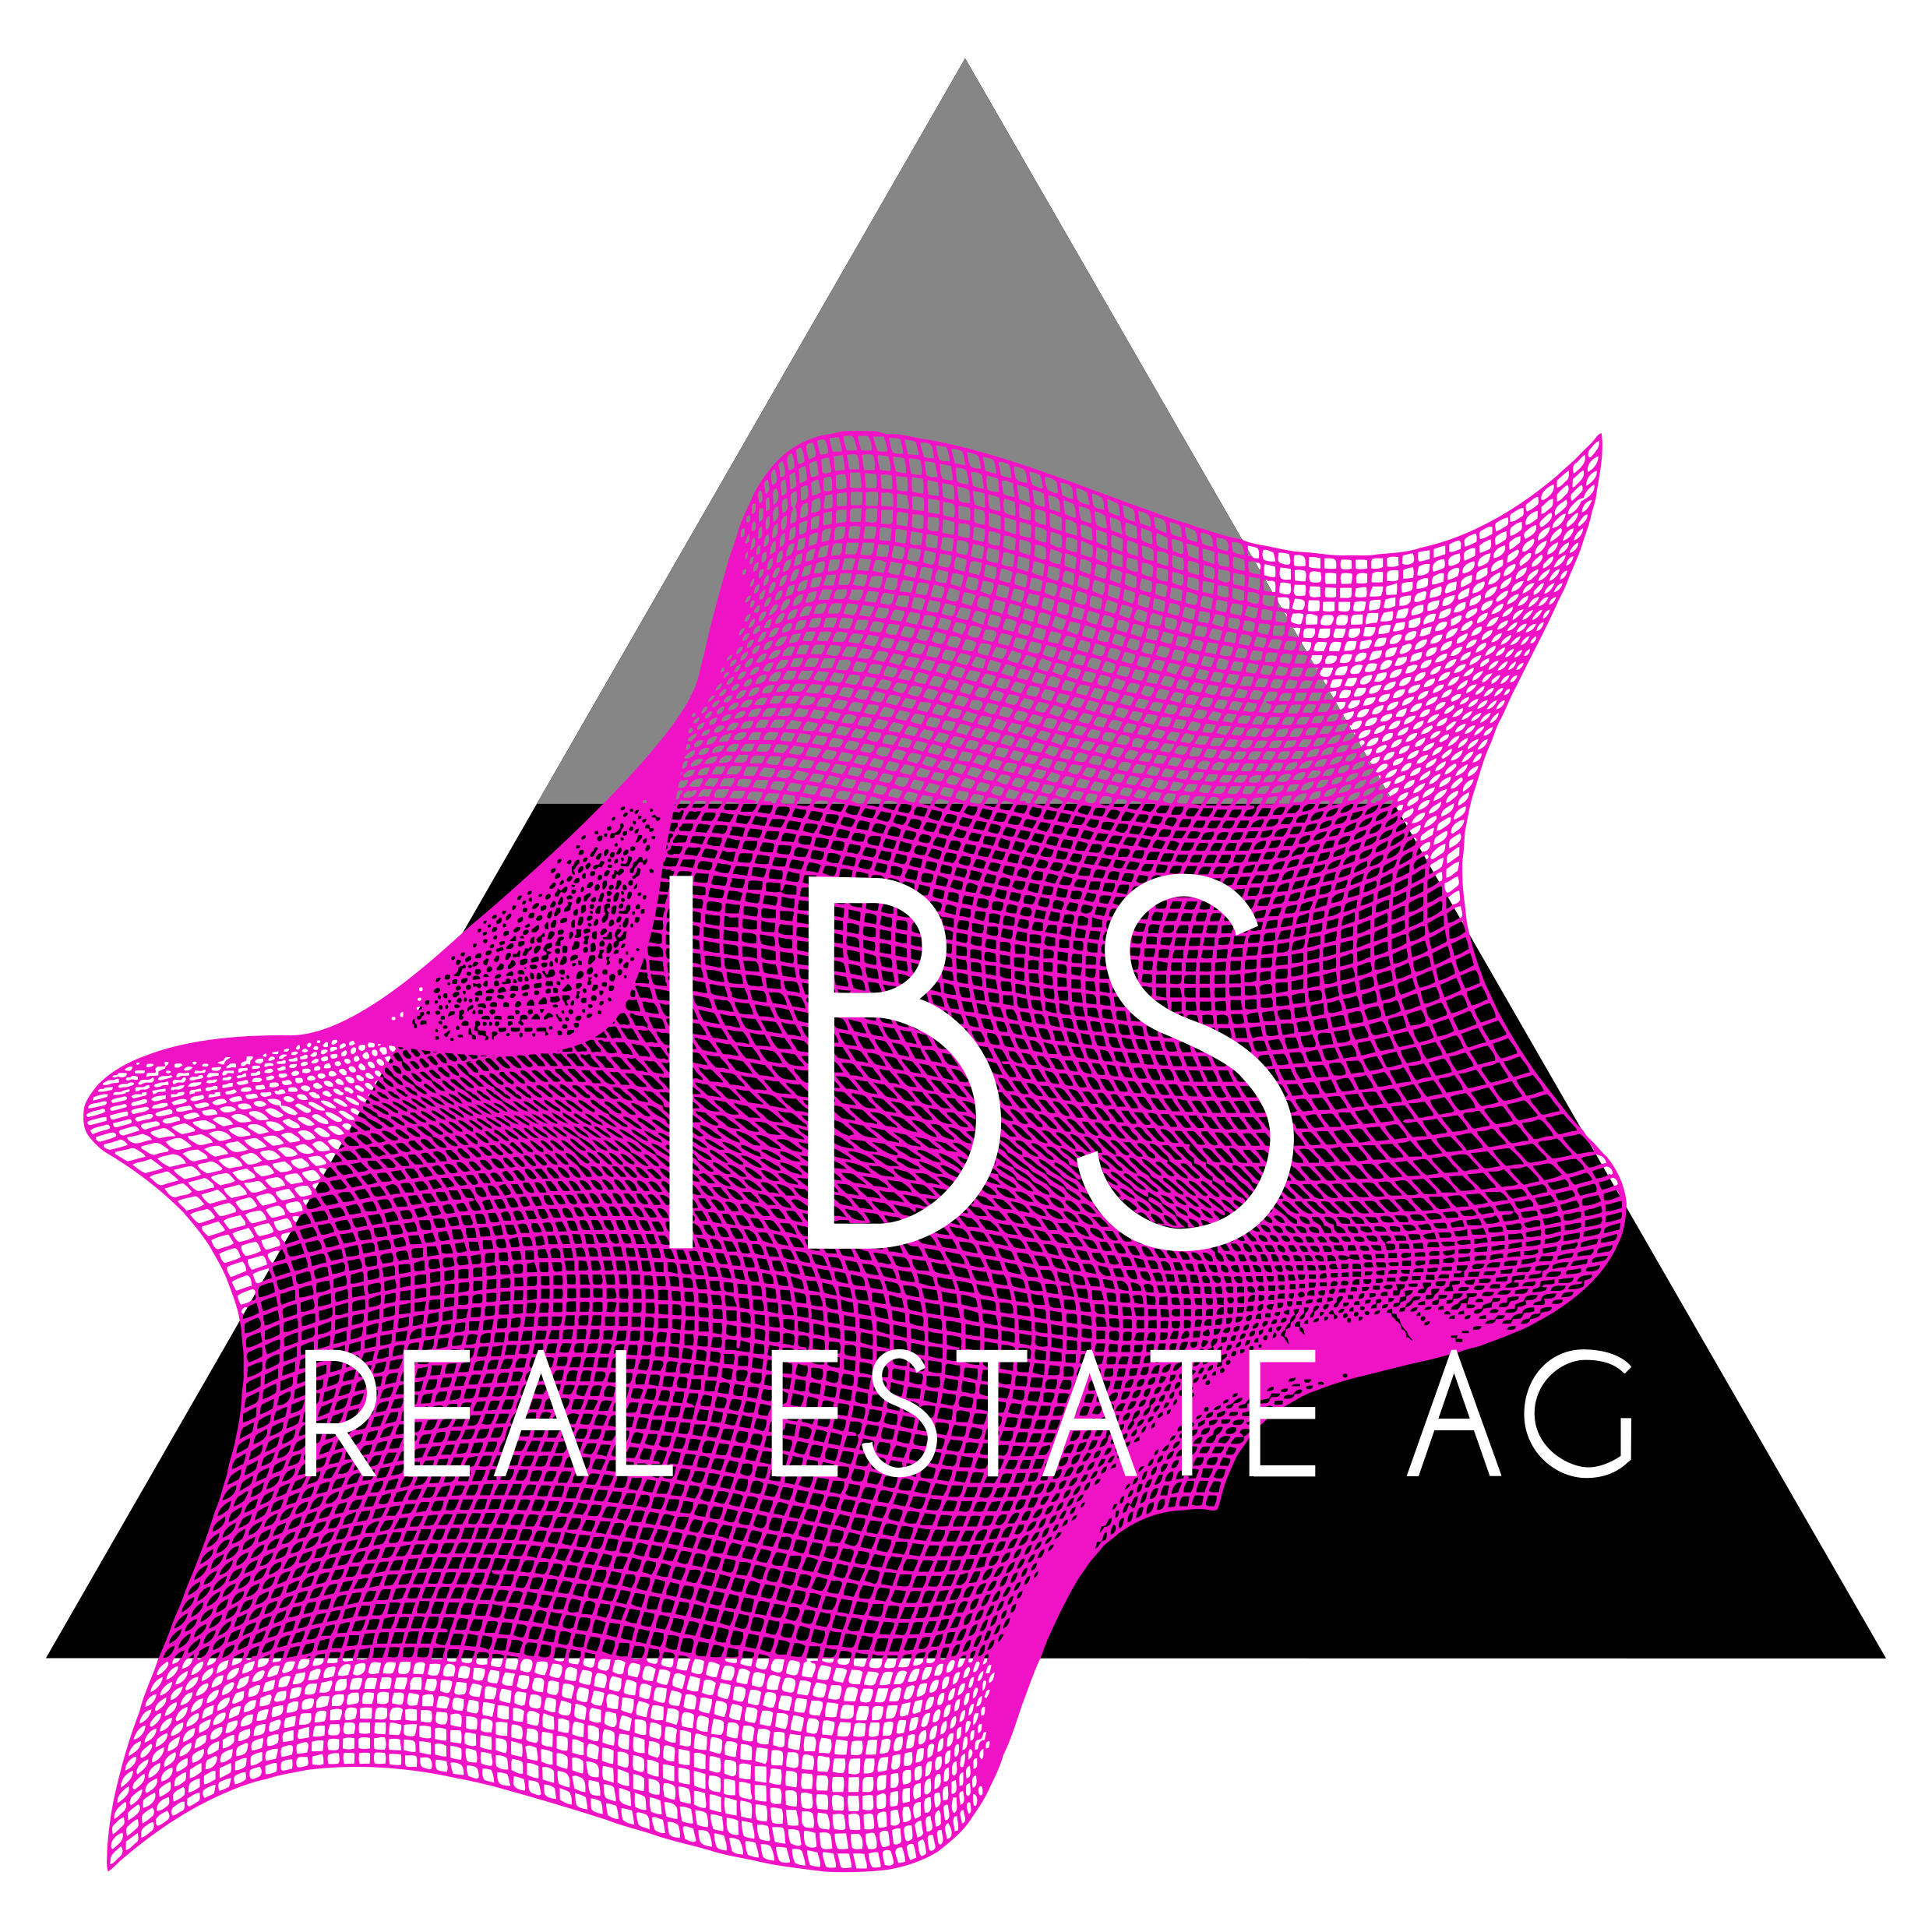 IBS Real Estate AG